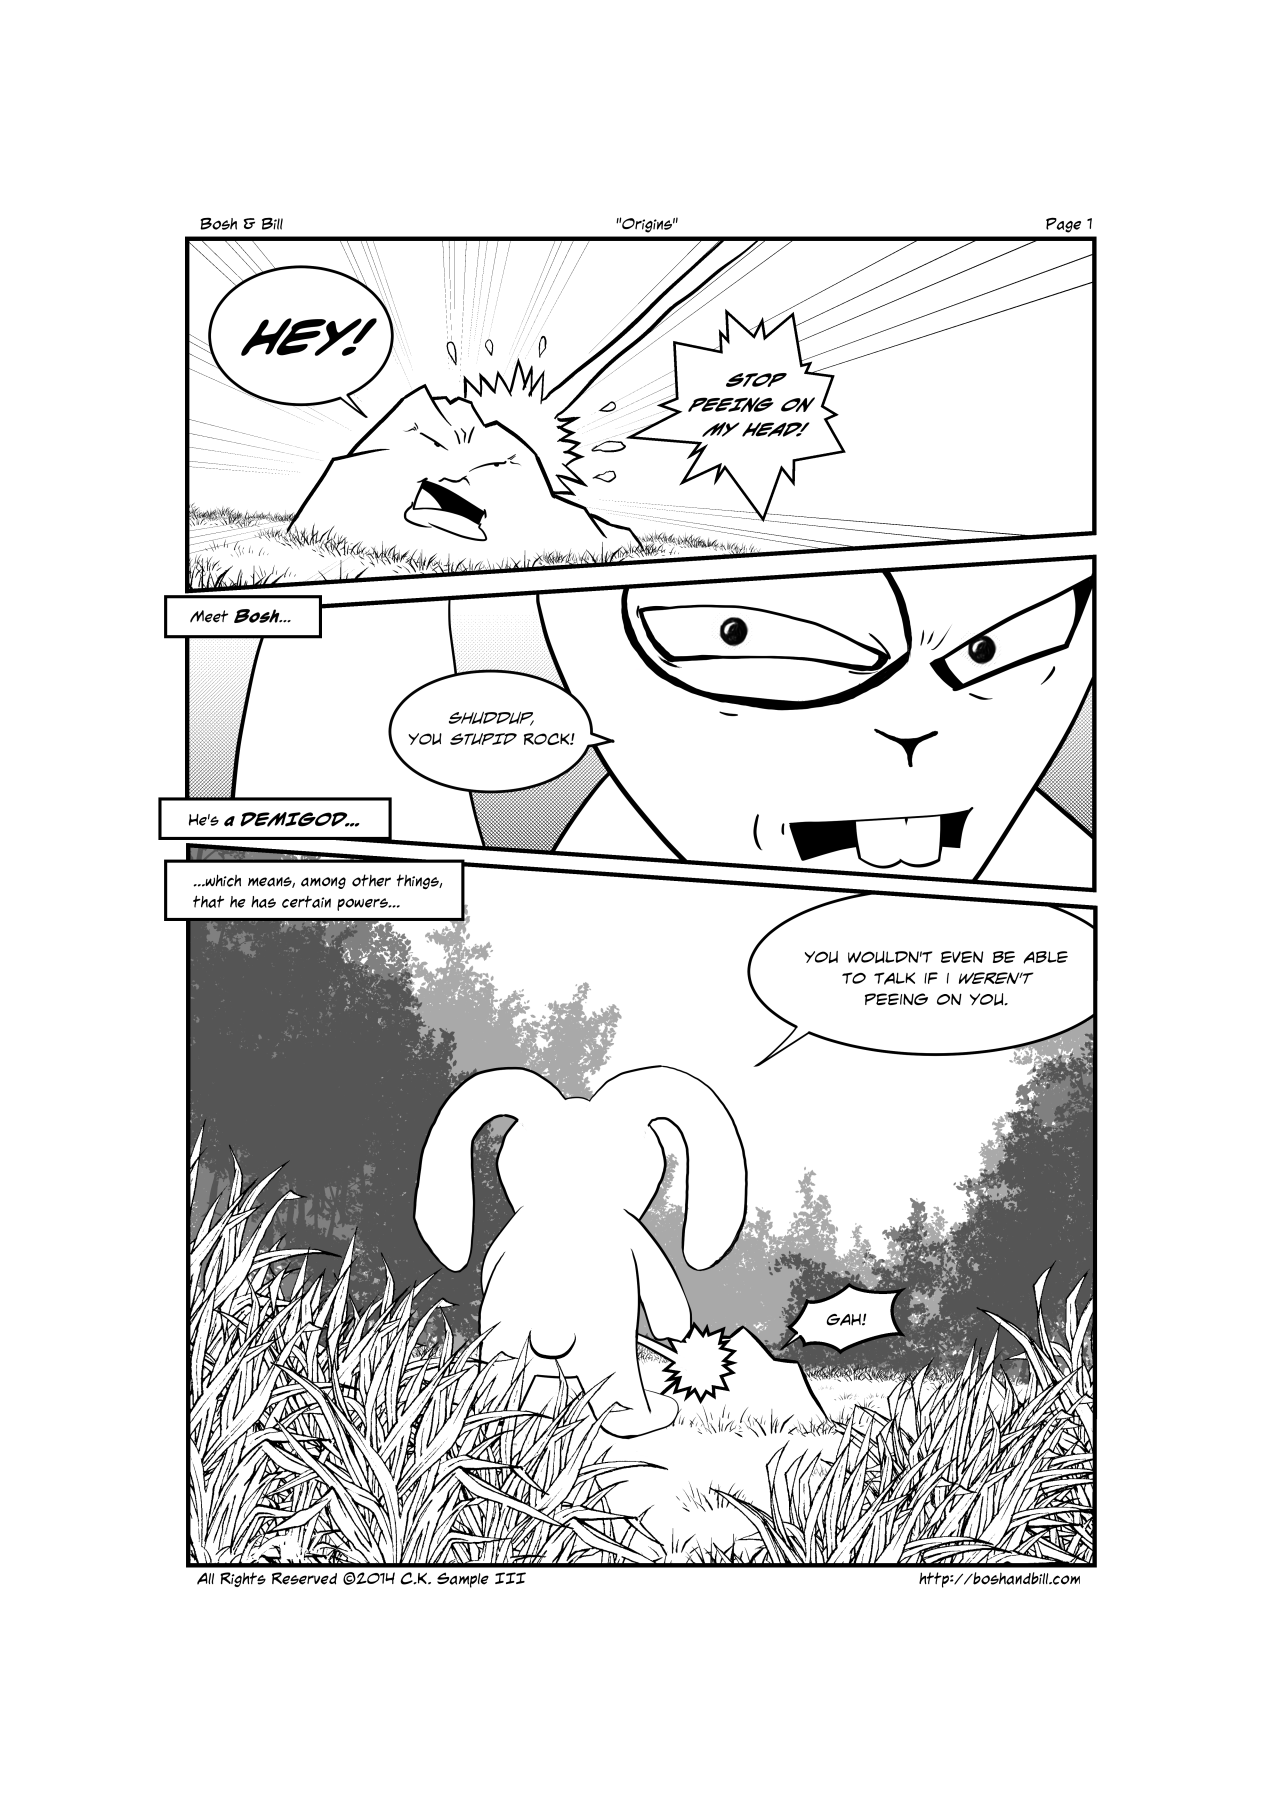 Okay. New version of page one. I decided to simplify it and remove a lot of the gradients I’d added before, so it’s more of a pure black and white. I also redid a bit of Bosh’s right foot in 3rd panel. I think this overall a stronger page now and I...